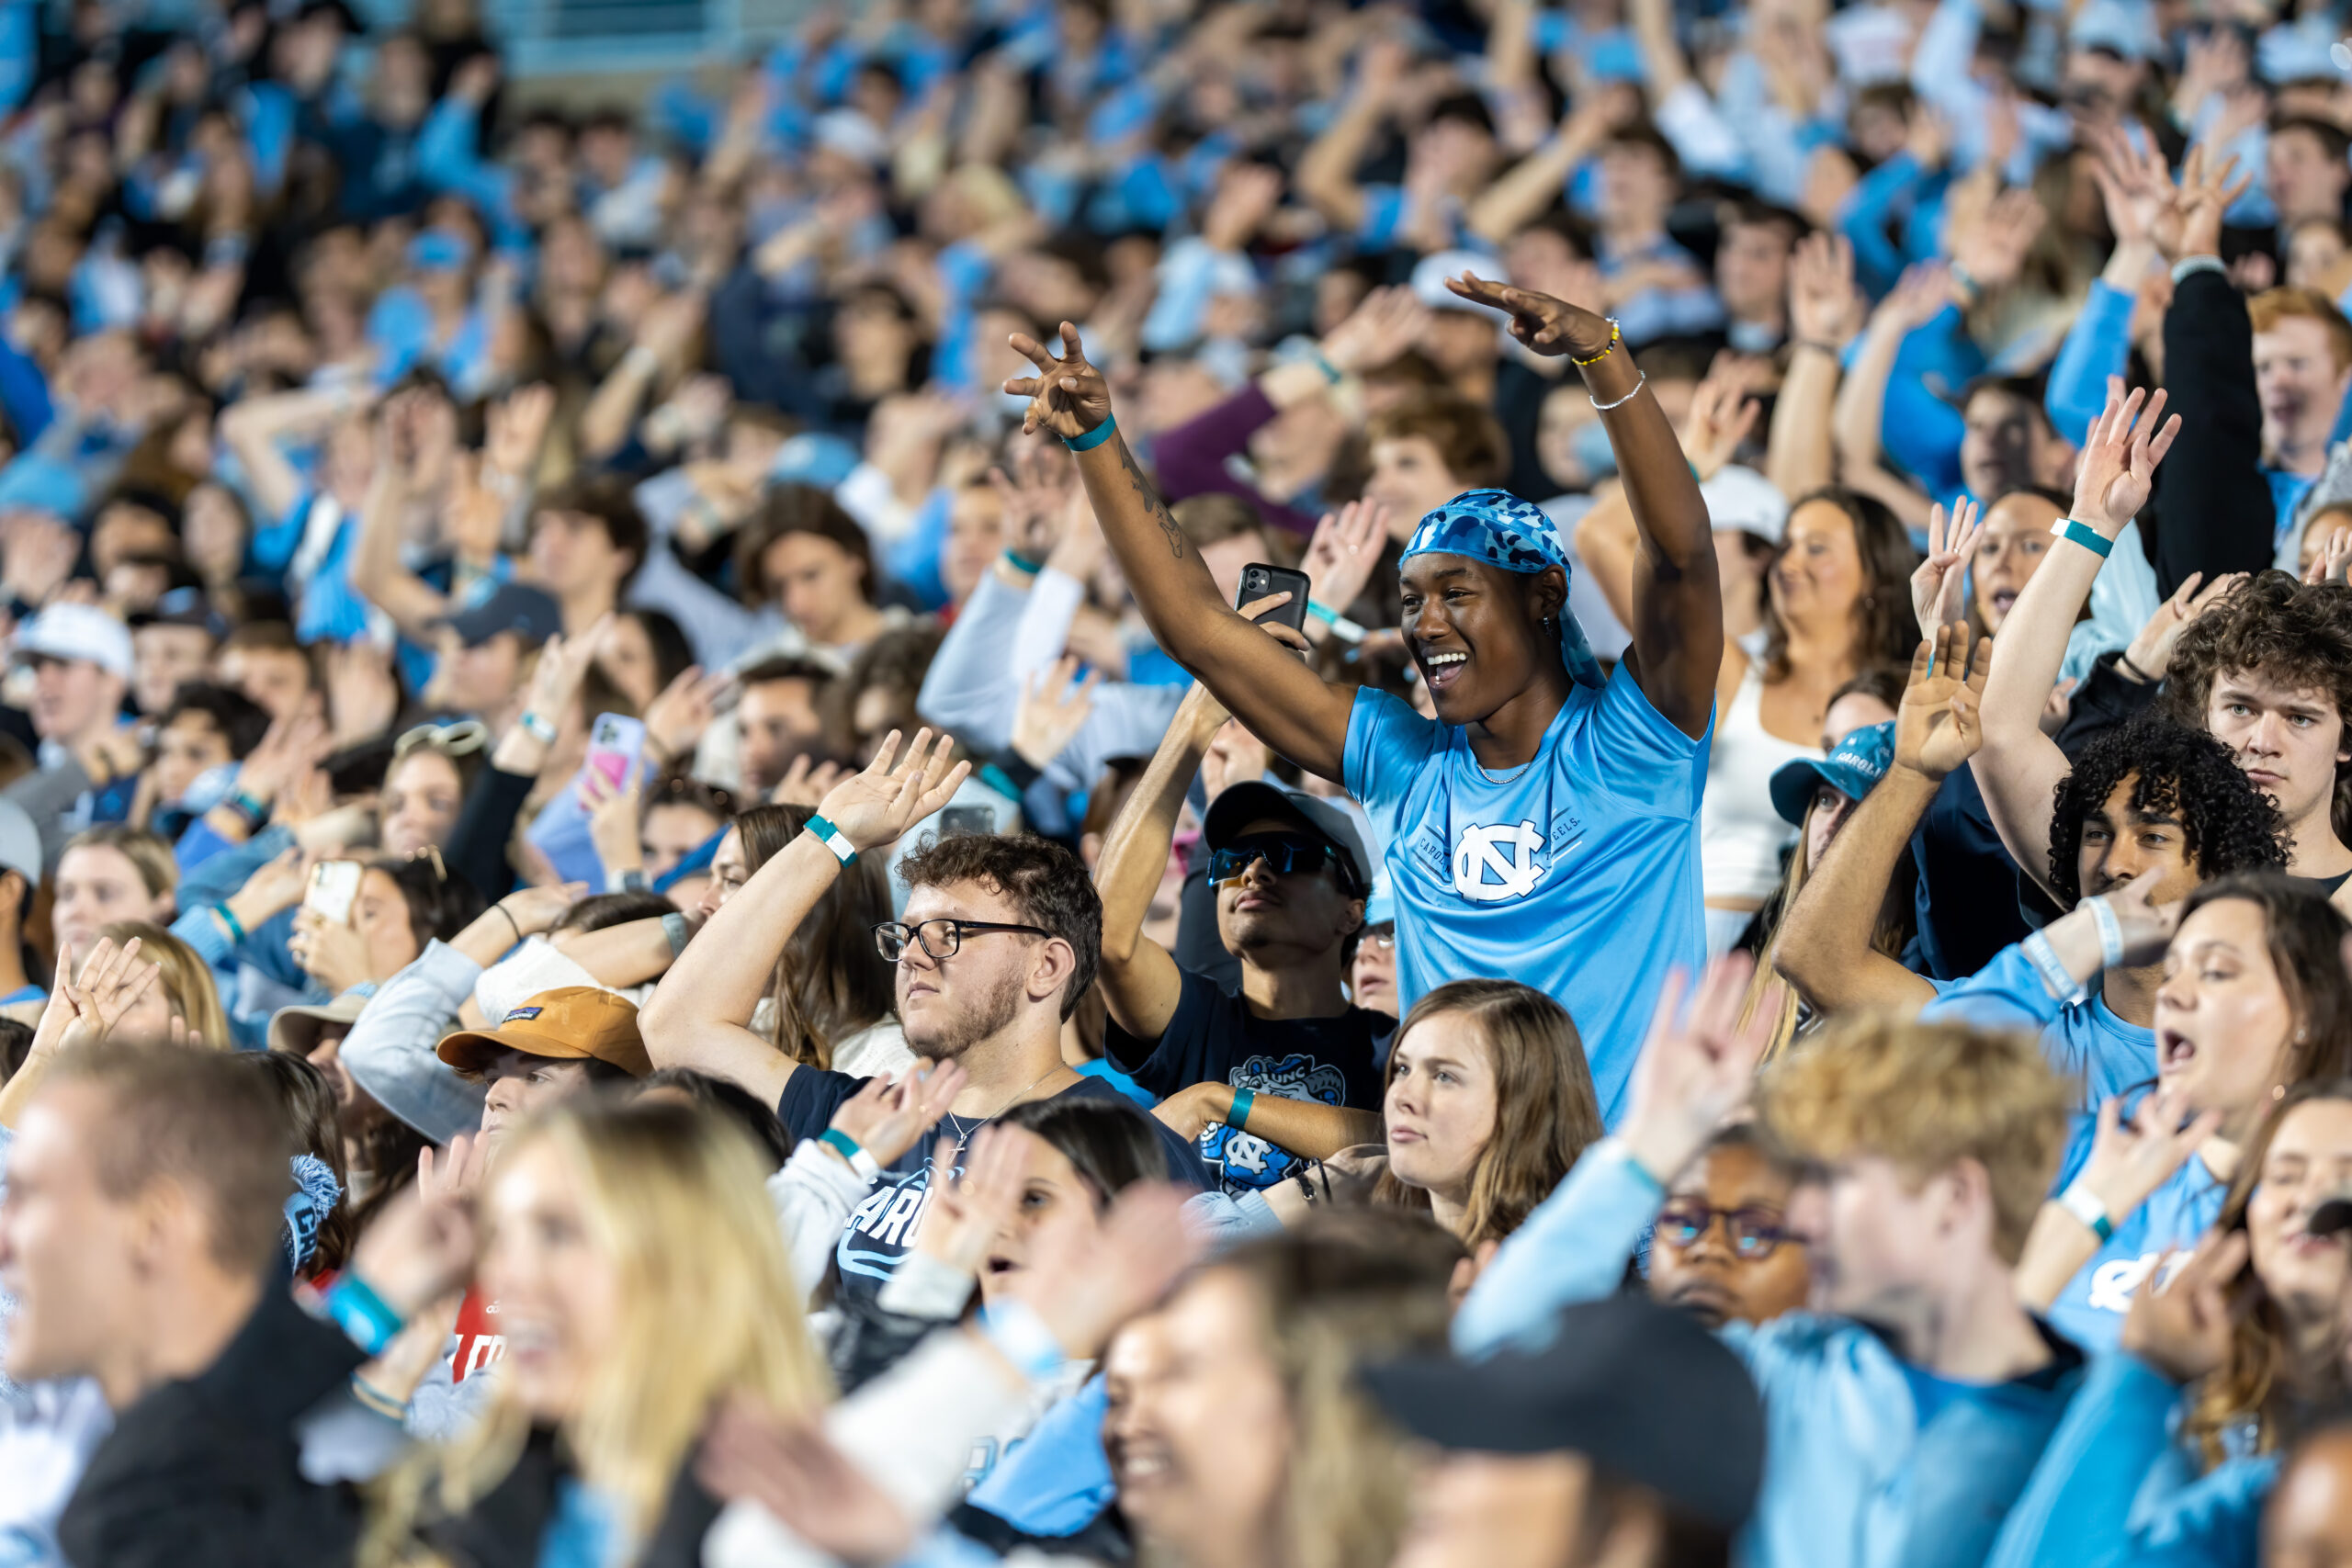 Financial Report Details First Surplus for UNC Athletics Since 2017-18 Academic Year